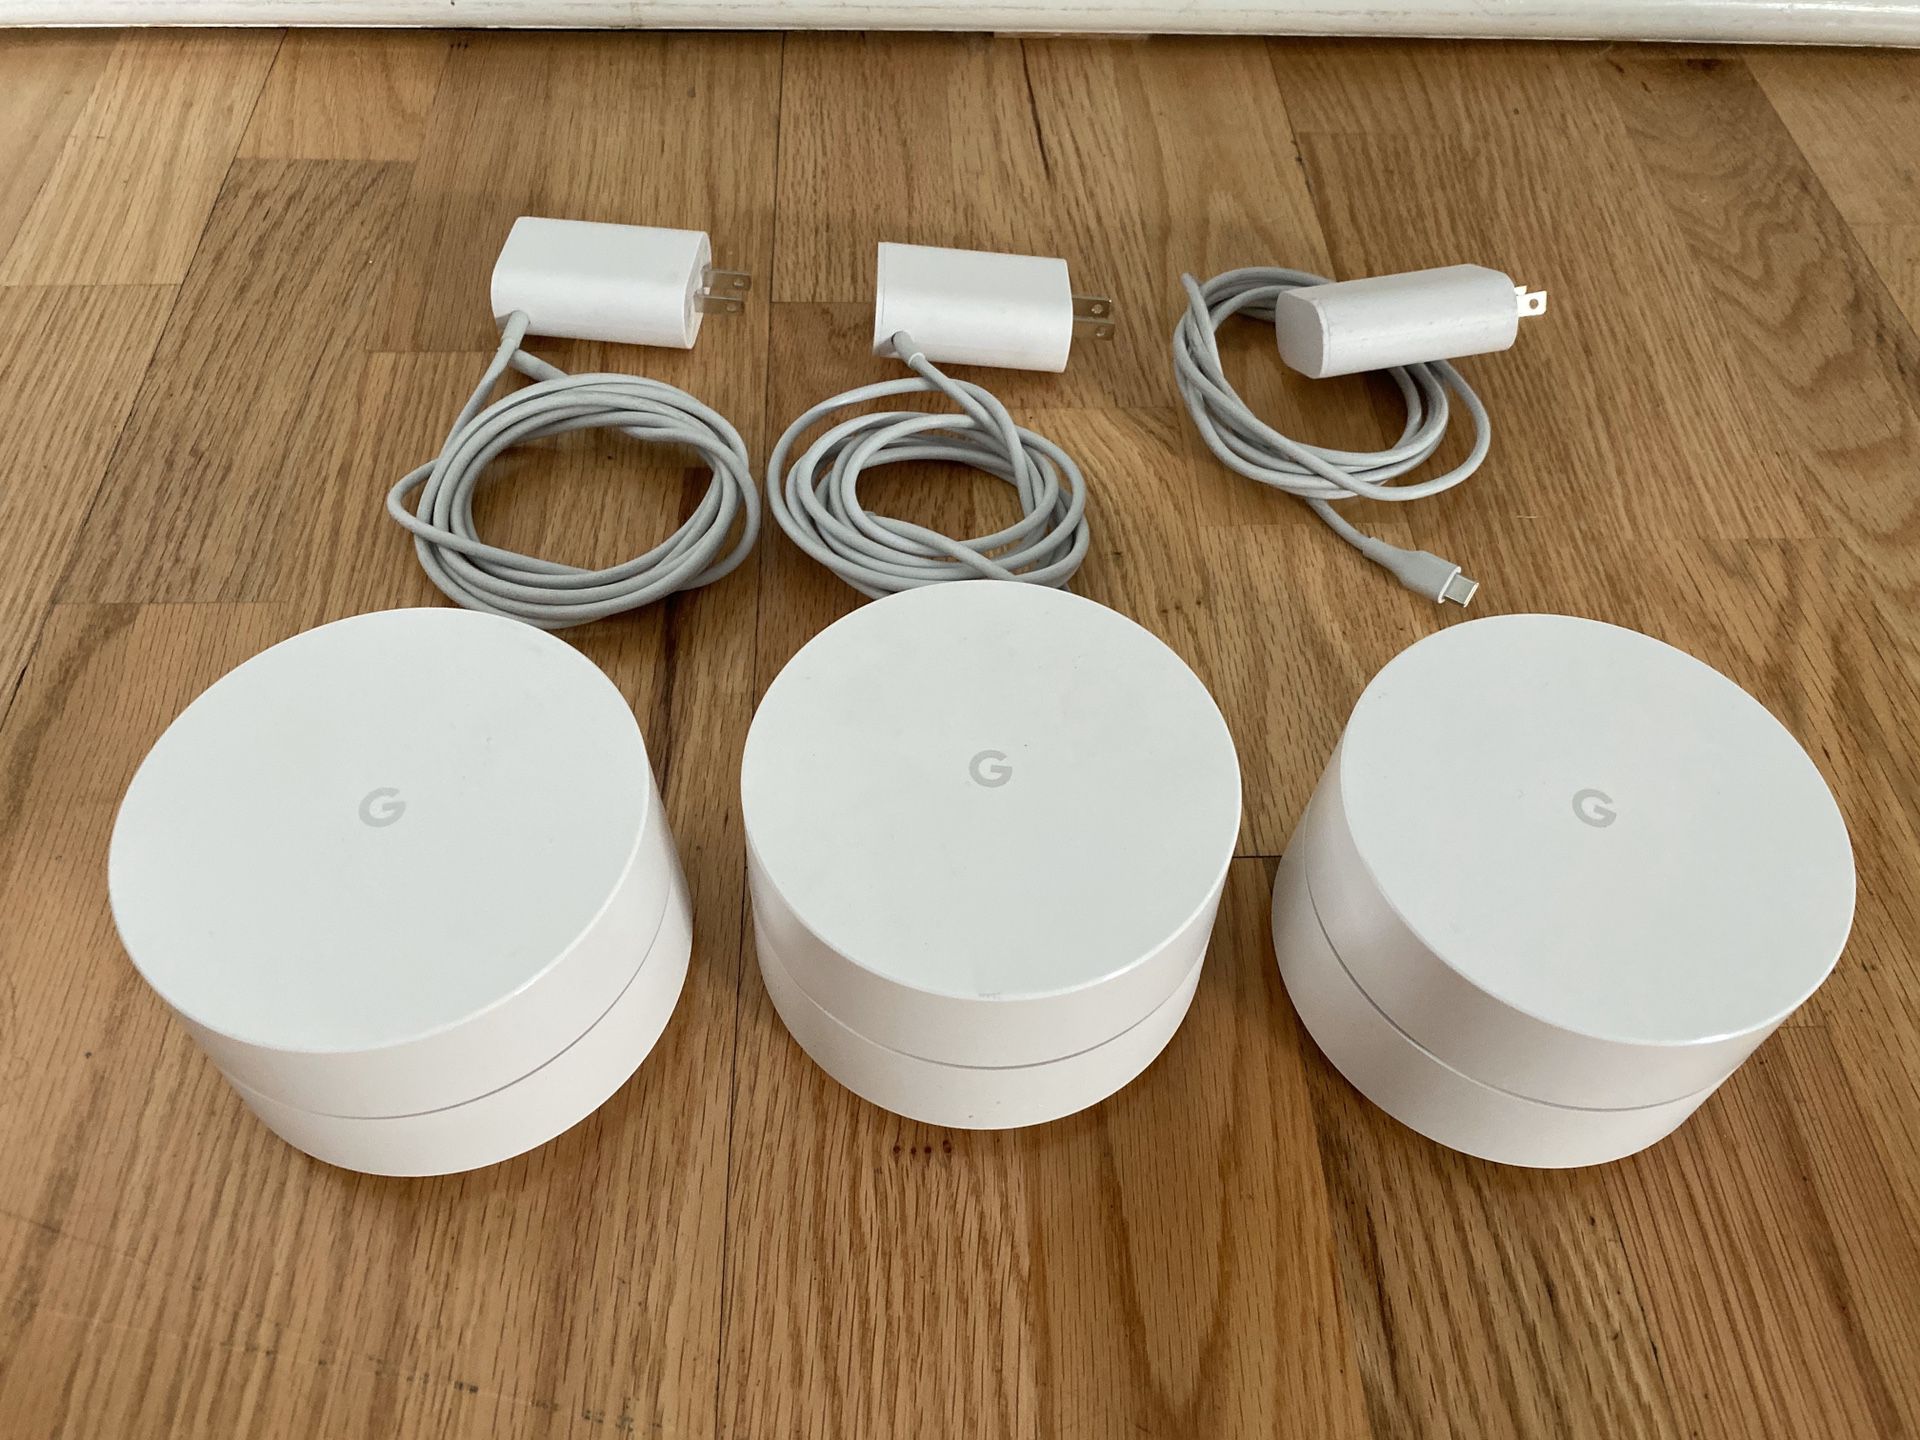 Google Mesh WiFi Router and Access Points - 3 Pack